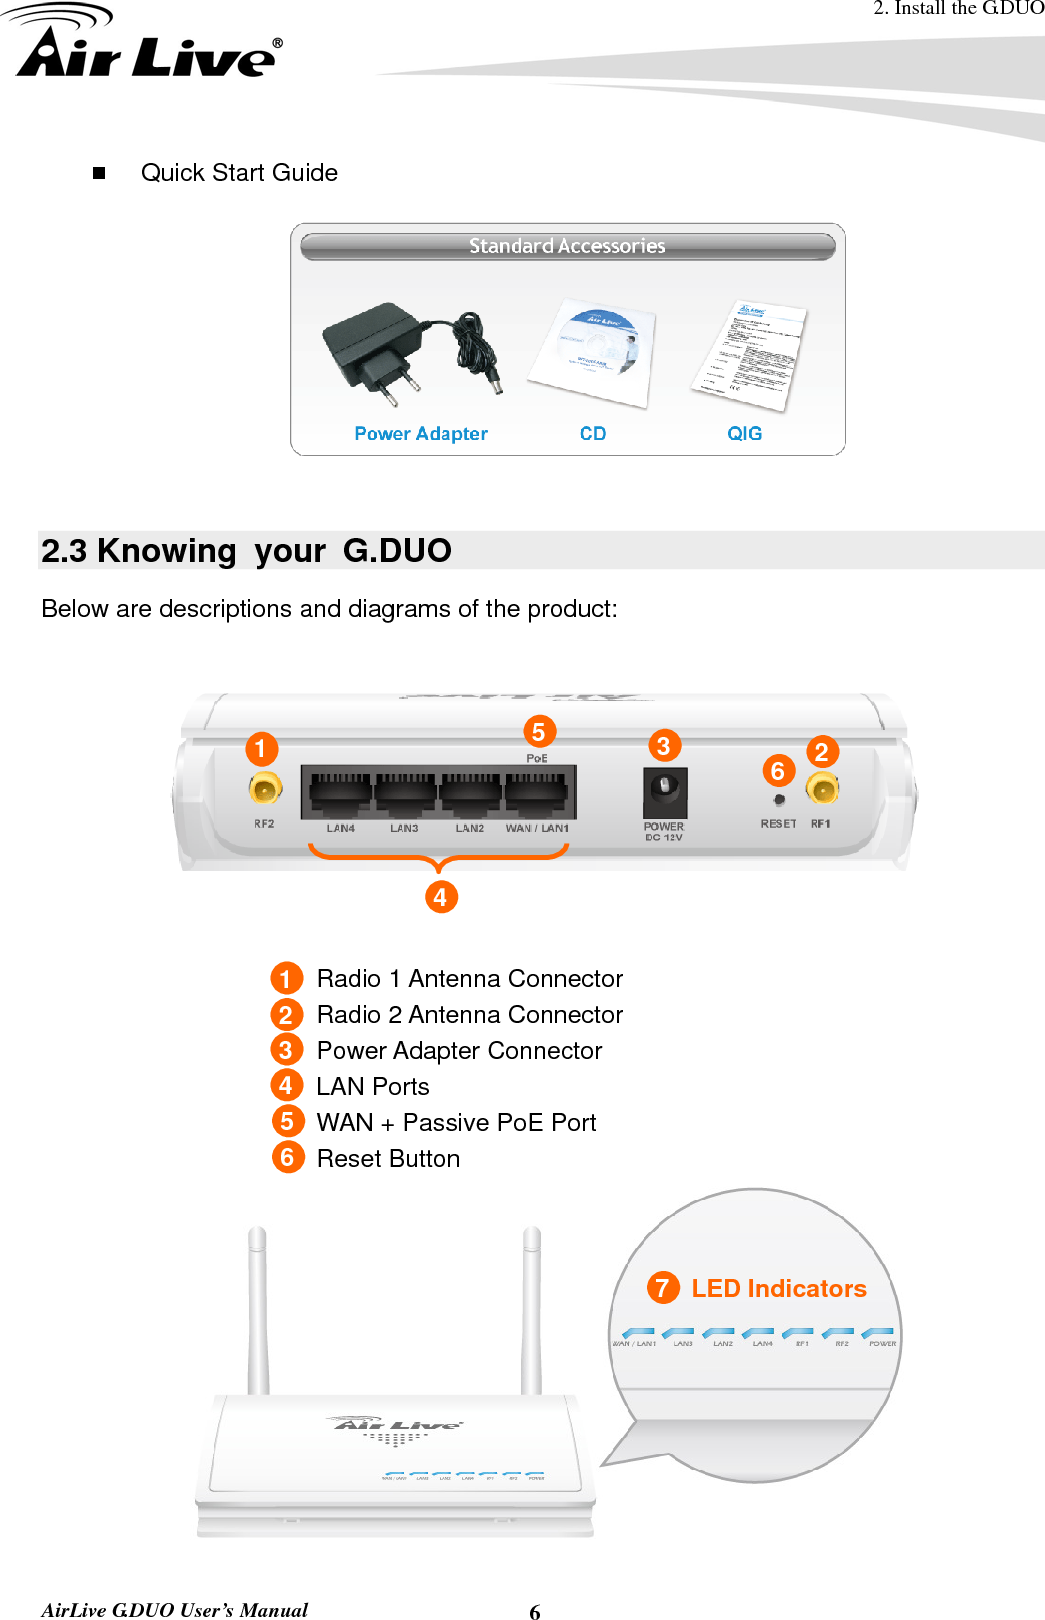 2. Install the G.DUO  AirLive G.DUO User’s Manual  6 Quick Start Guide     2.3 Knowing  your  G.DUO Below are descriptions and diagrams of the product:     Radio 1 Antenna Connector Radio 2 Antenna Connector Power Adapter Connector LAN Ports WAN + Passive PoE Port Reset Button  1 2 3 4 5 6 1  2 3 4 5 6 7  LED Indicators 